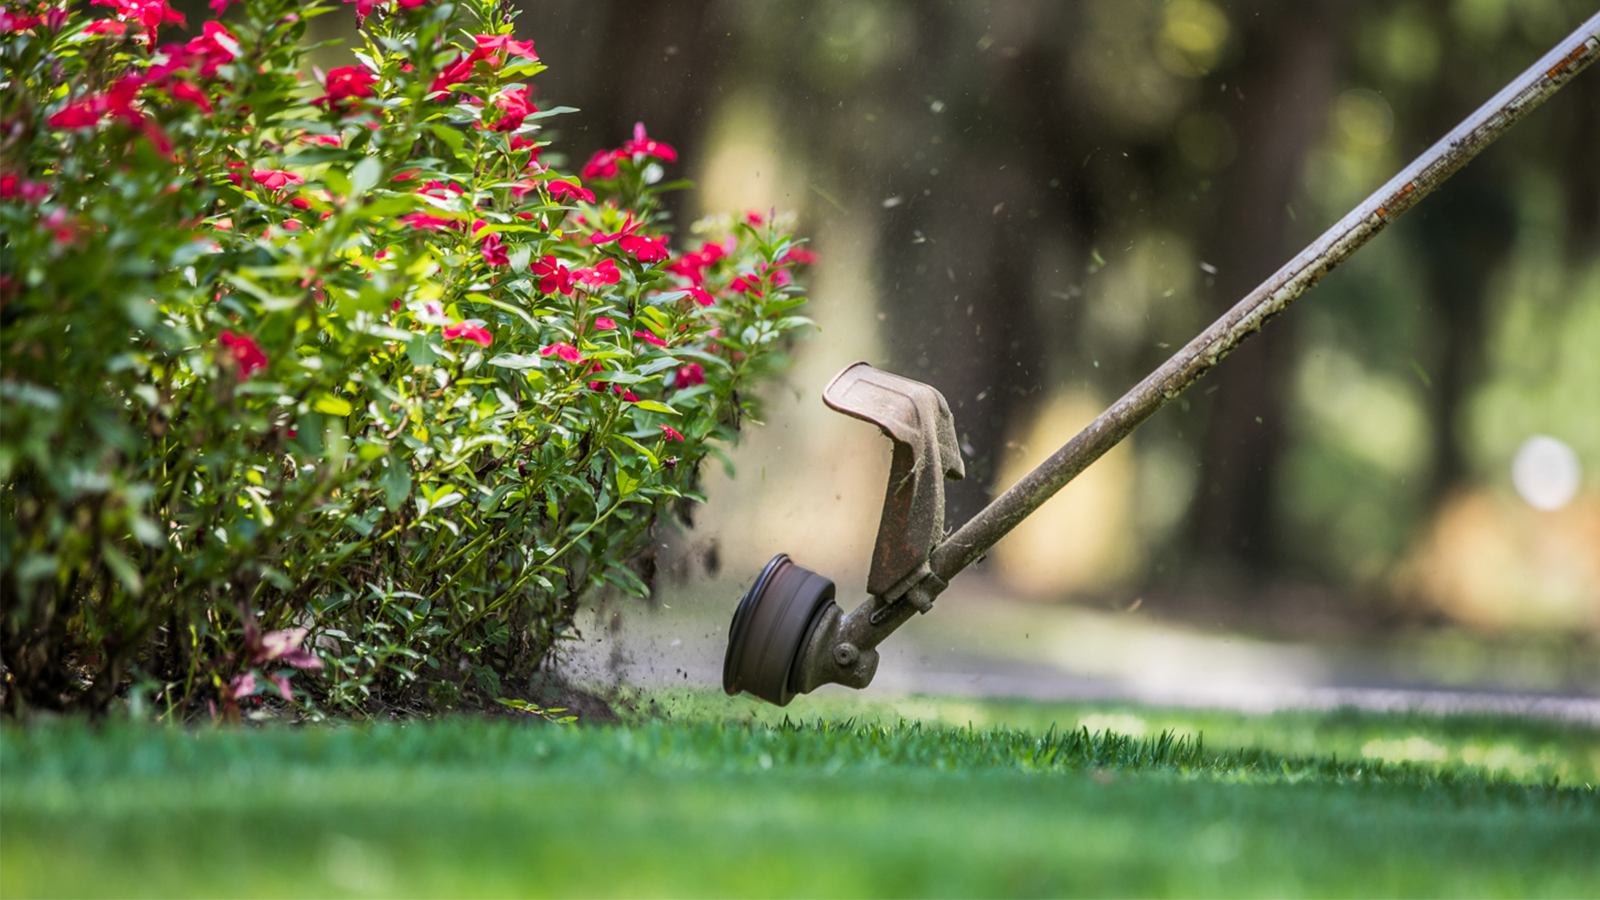 Lawn Maintenance Services in South Carolina 5